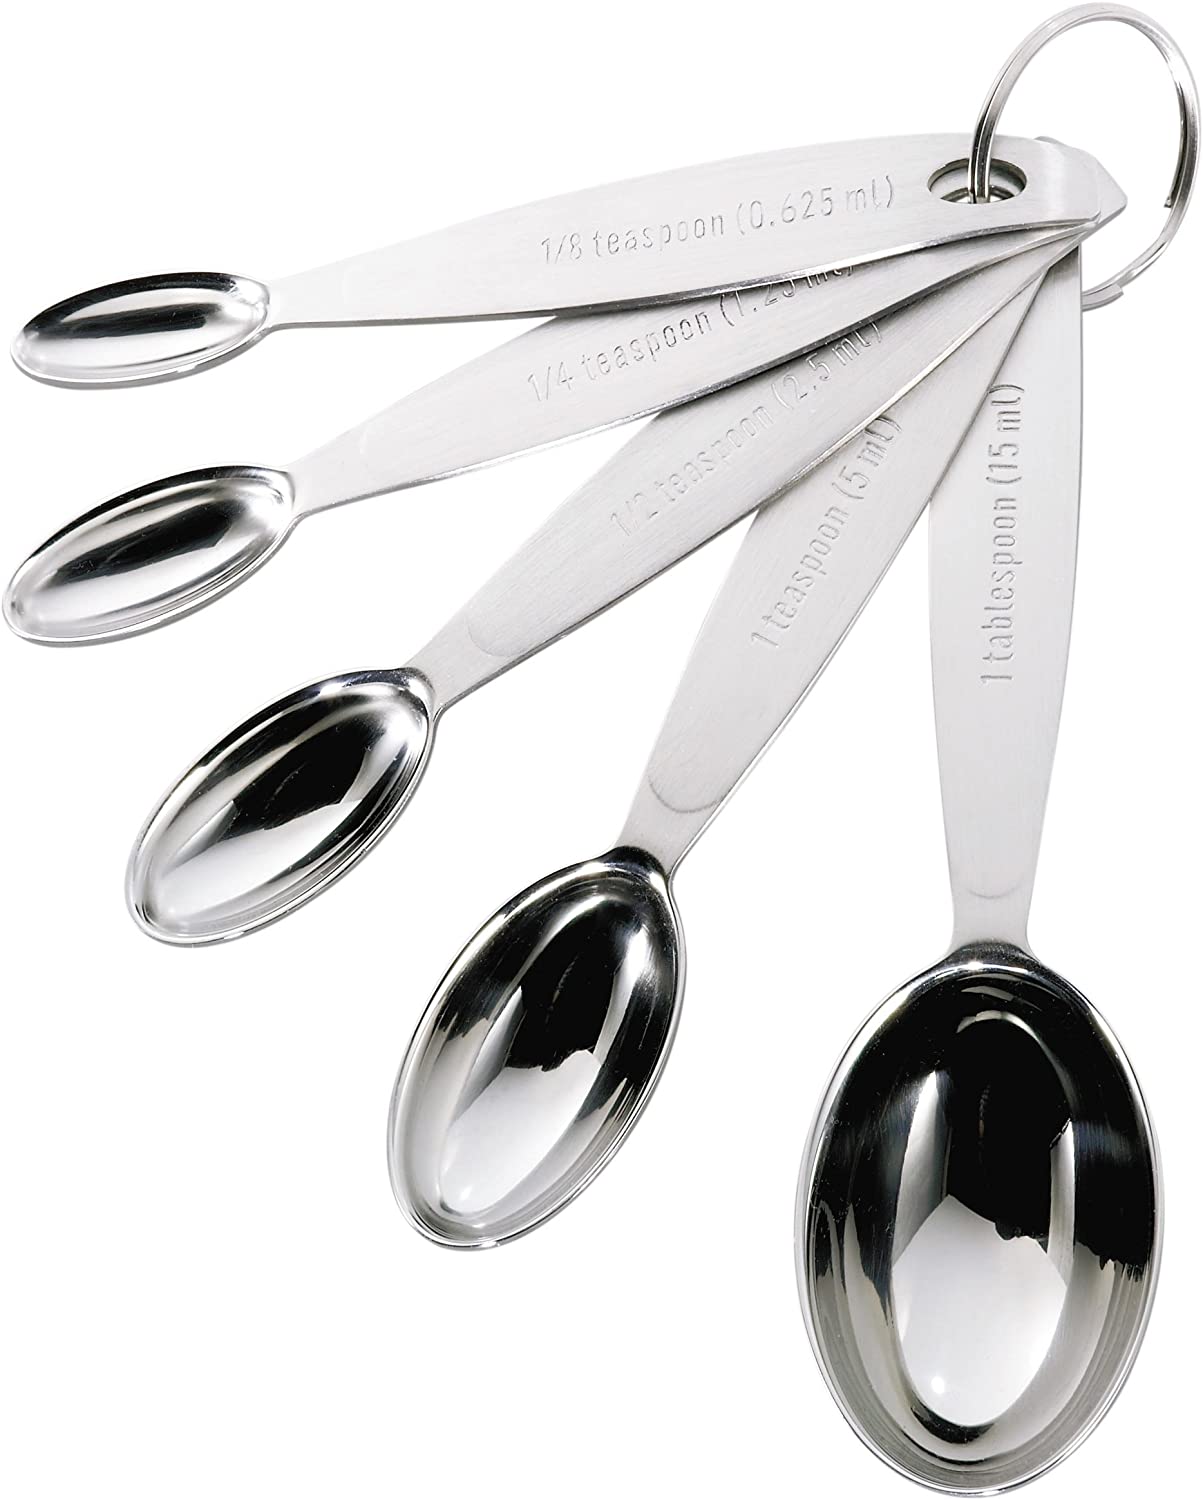 OXO Good Grips Set of 4 Stainless Steel Magnetic Measuring Cups - ShopStyle